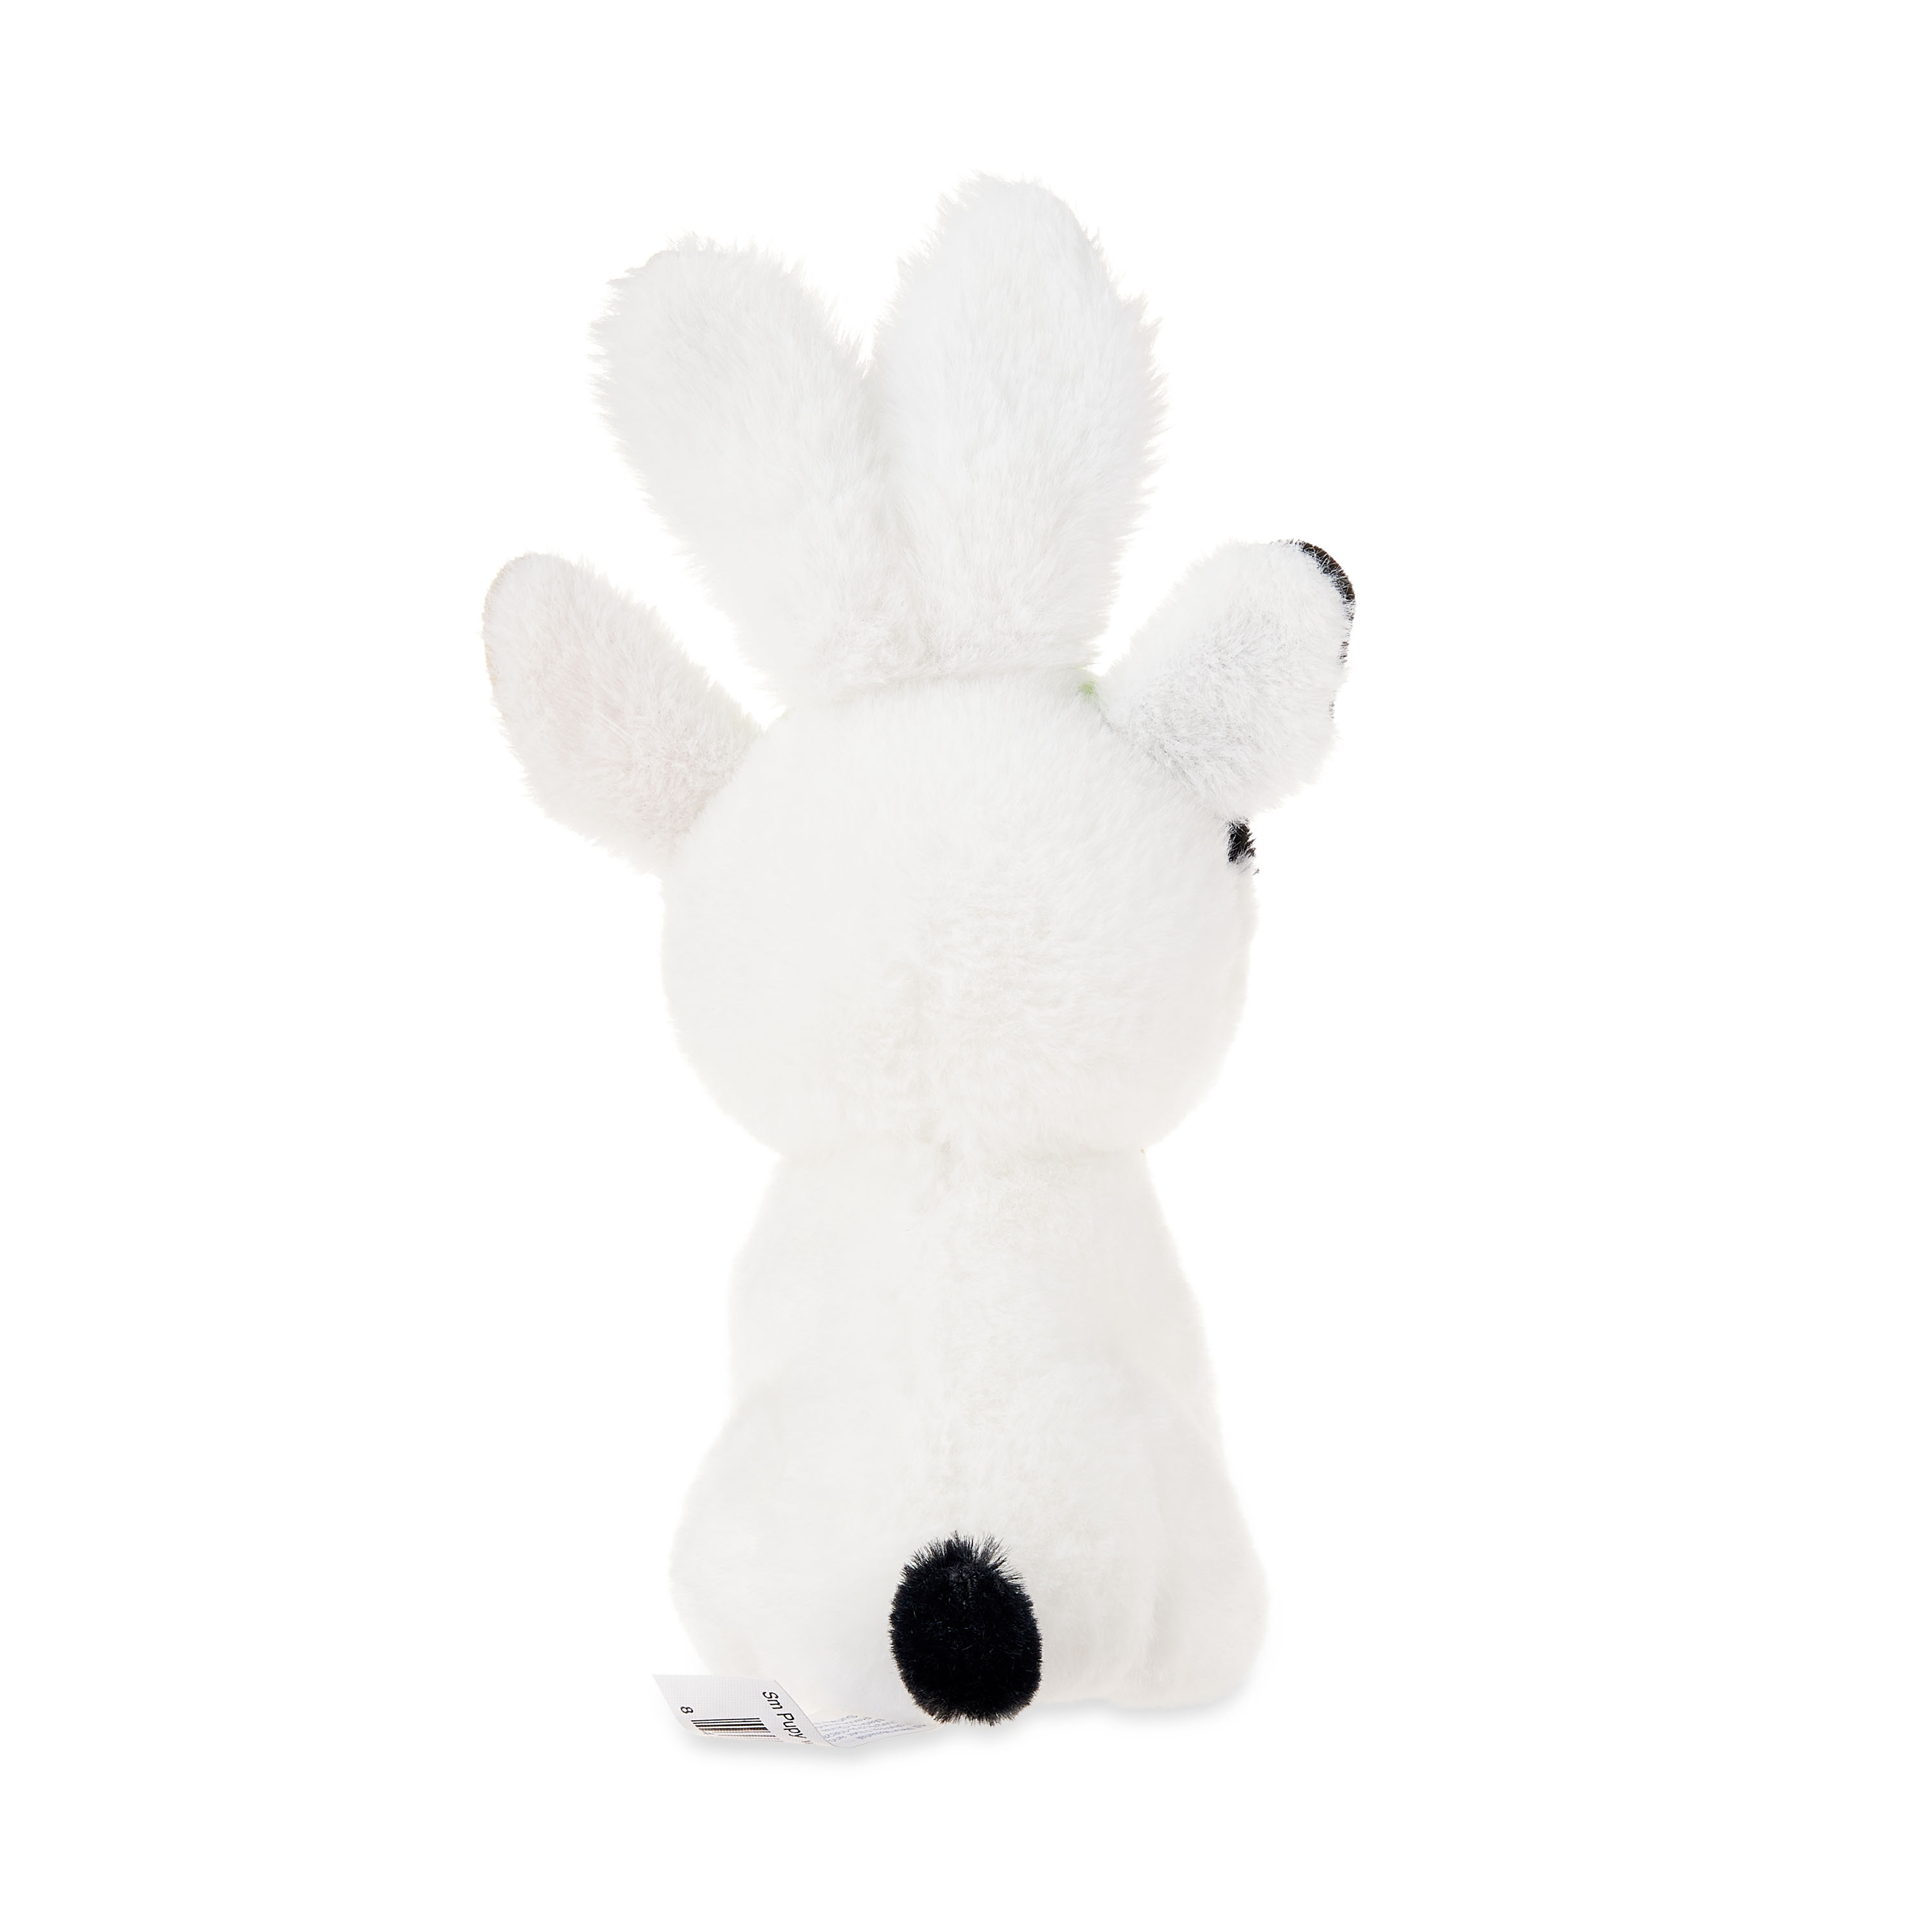 Easter Plush 7-inch Small Pup w/ Ears Grey , for 3 years up, Way To Celebrate - image 4 of 5